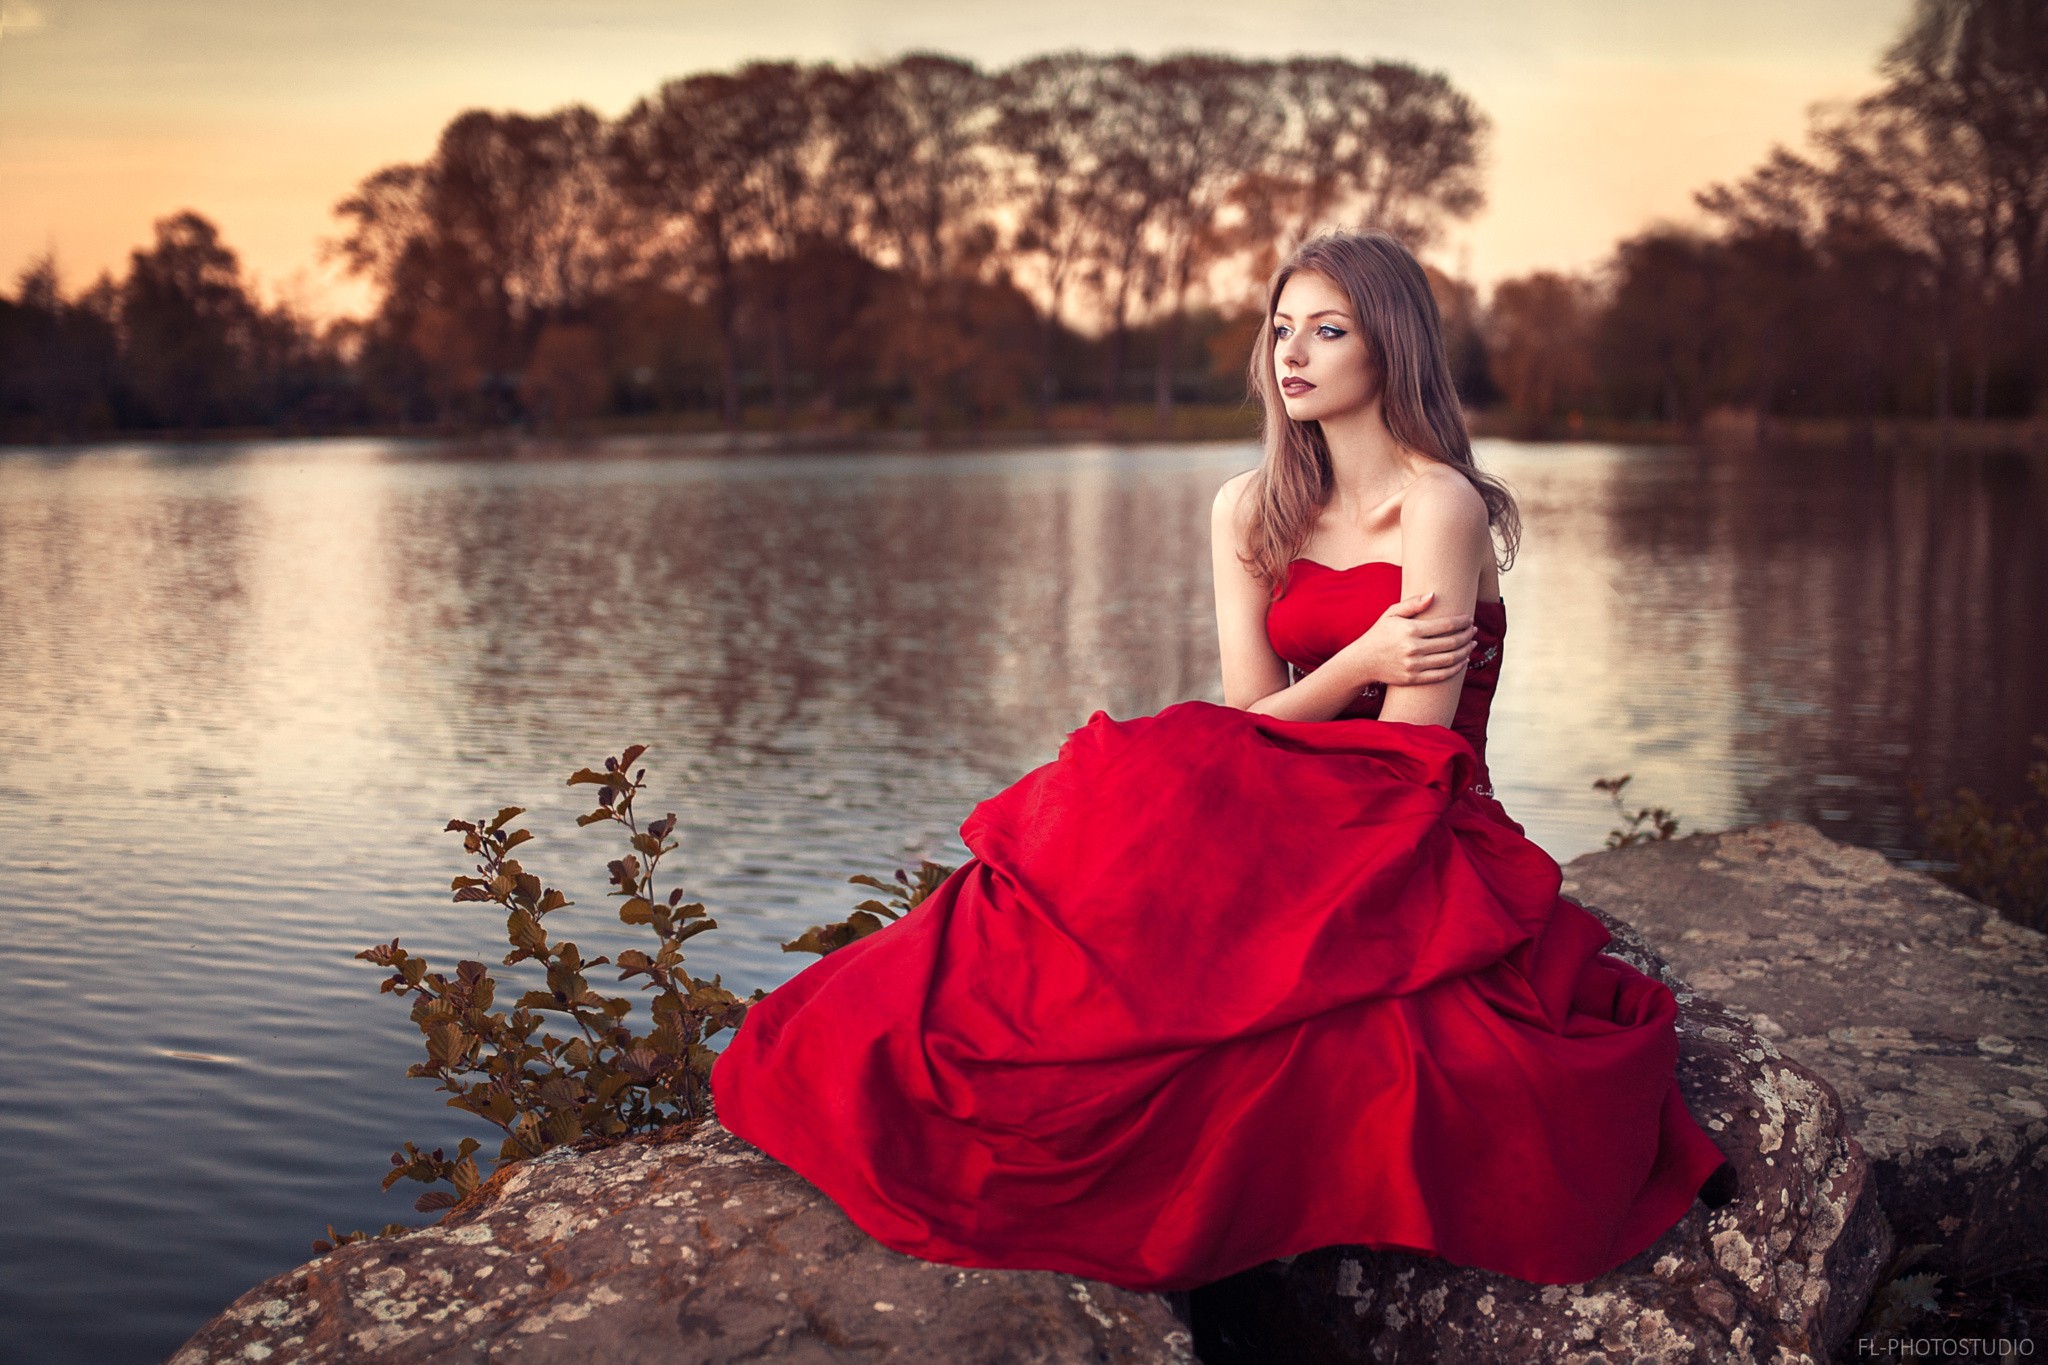 People 2048x1365 women outdoors women model Lods Franck dress blonde long hair lake bare shoulders looking away strapless dress Lea Cuvillier red dress looking into the distance smiling classy glamour rocks water makeup sitting FL-Photostudio